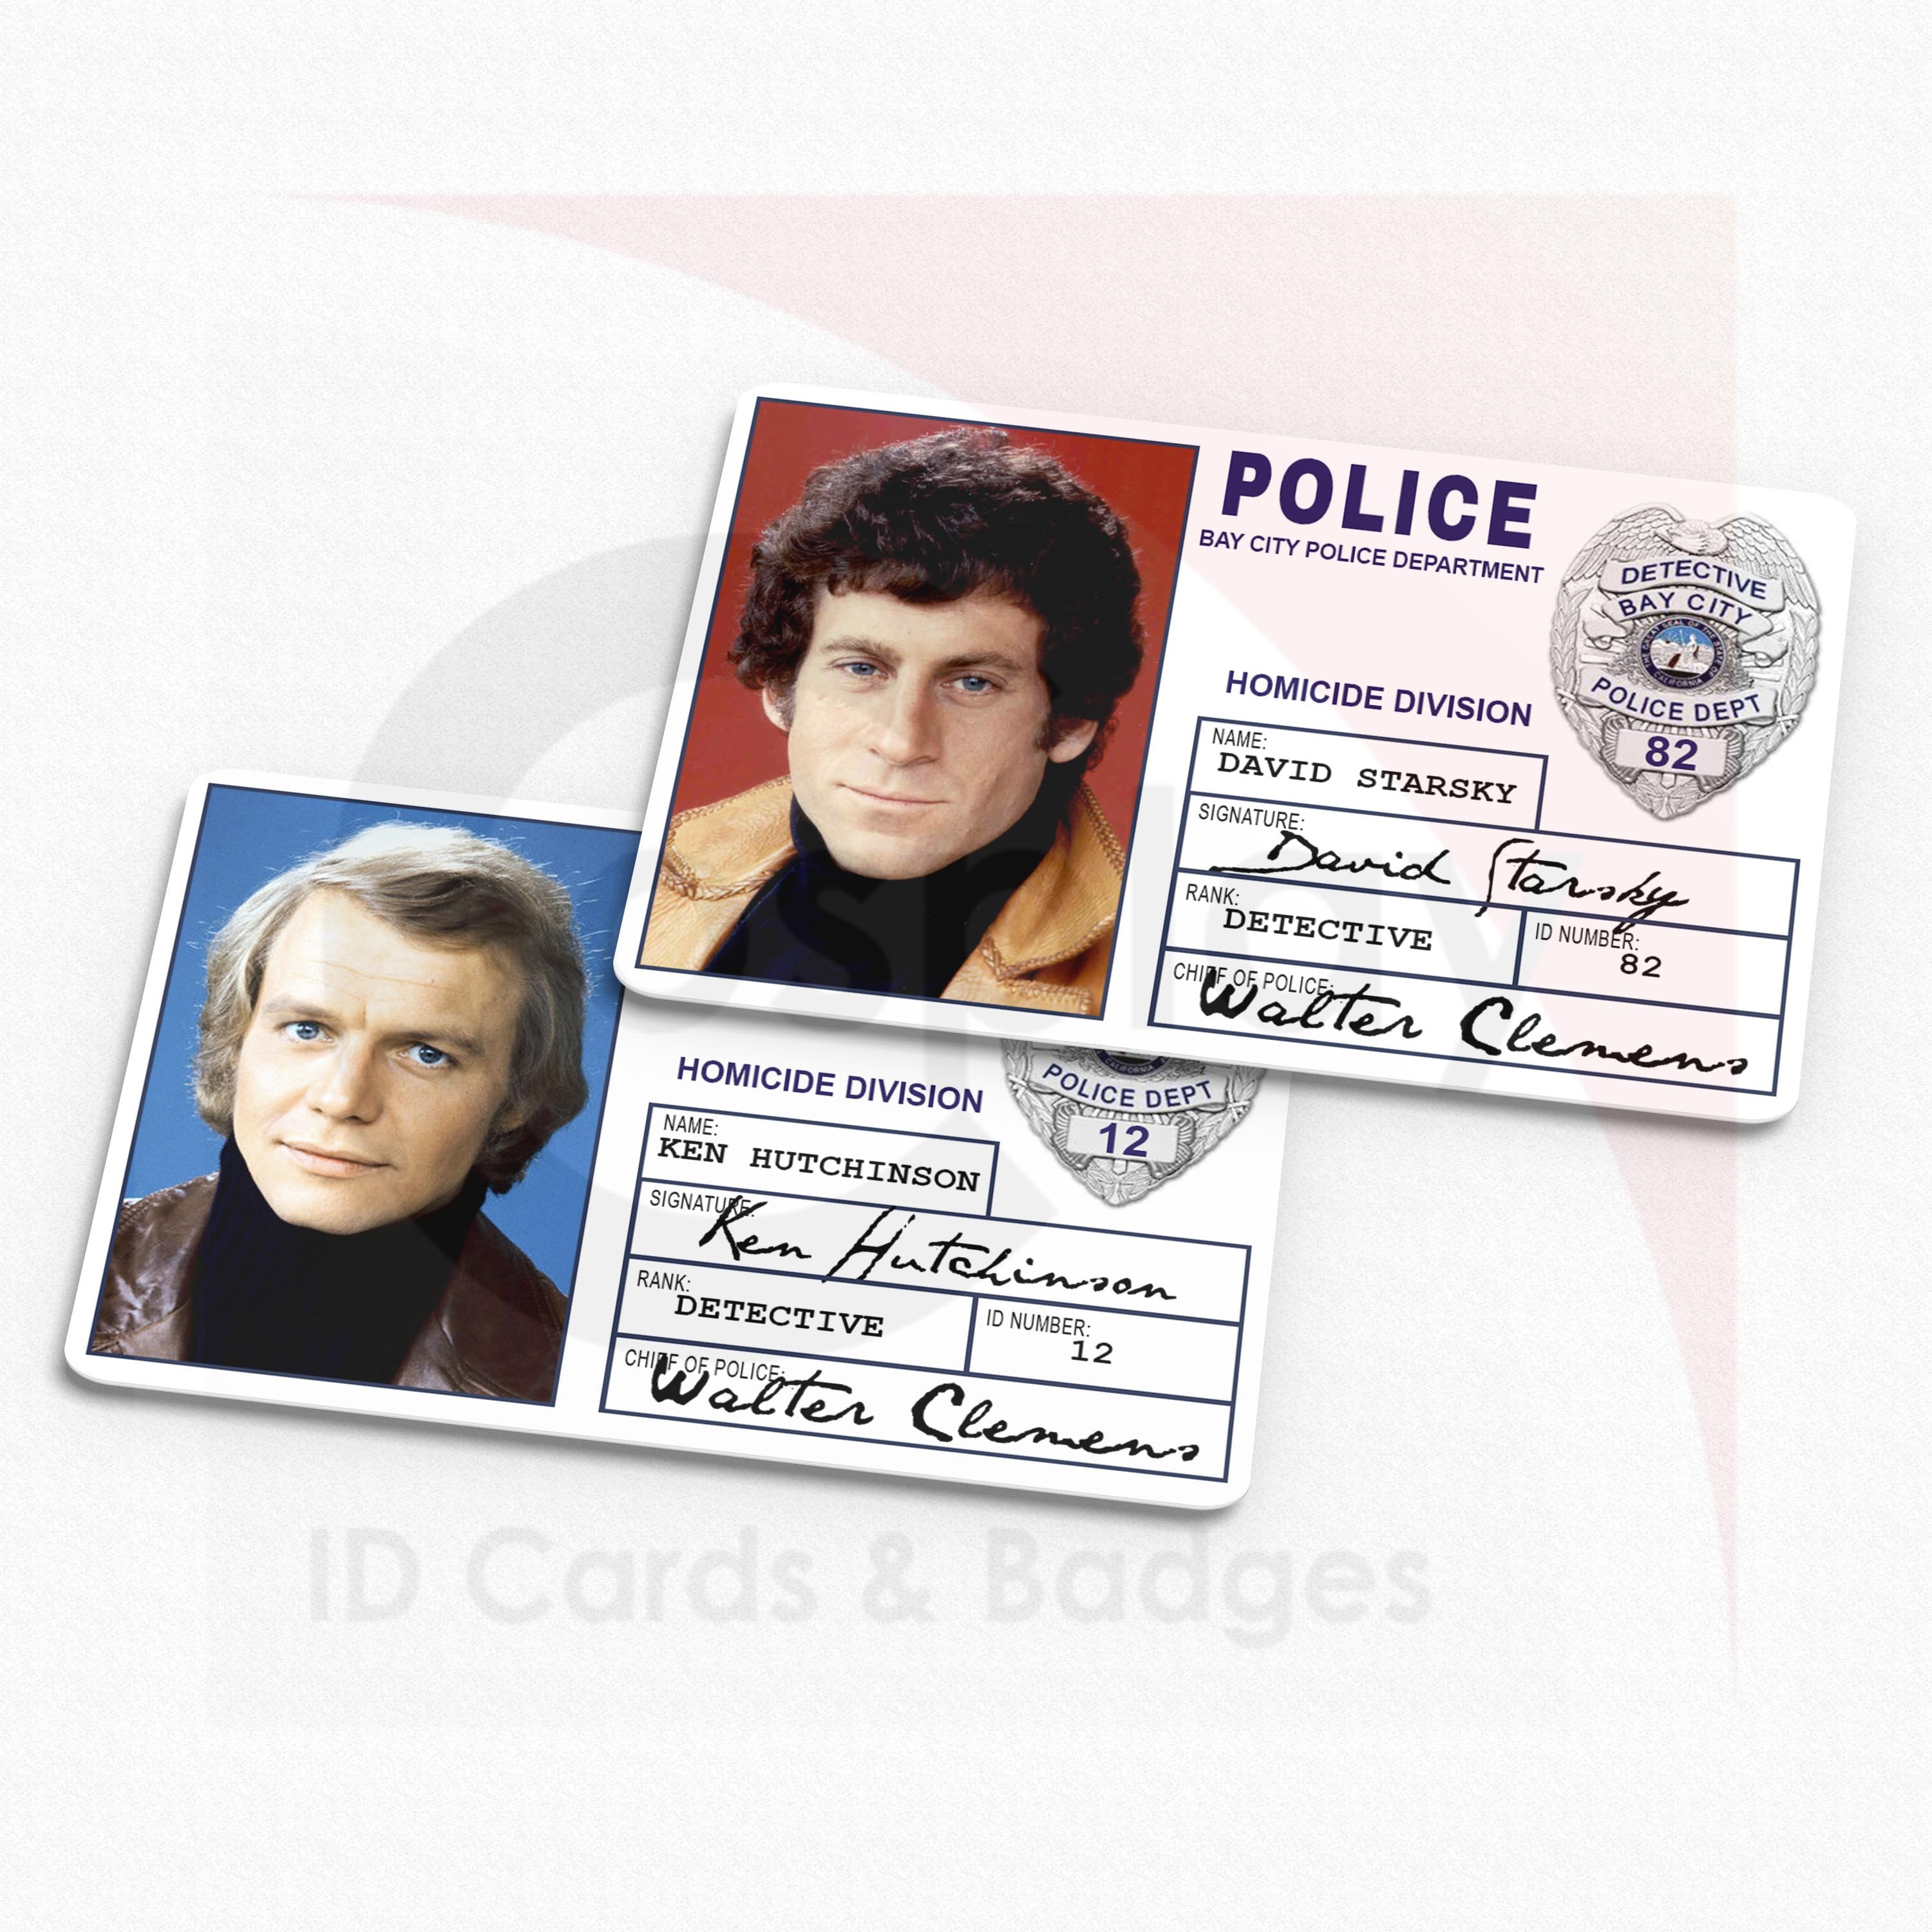 STARSKY AND HUTCH US TV series 1975/1979. From l: David Soul